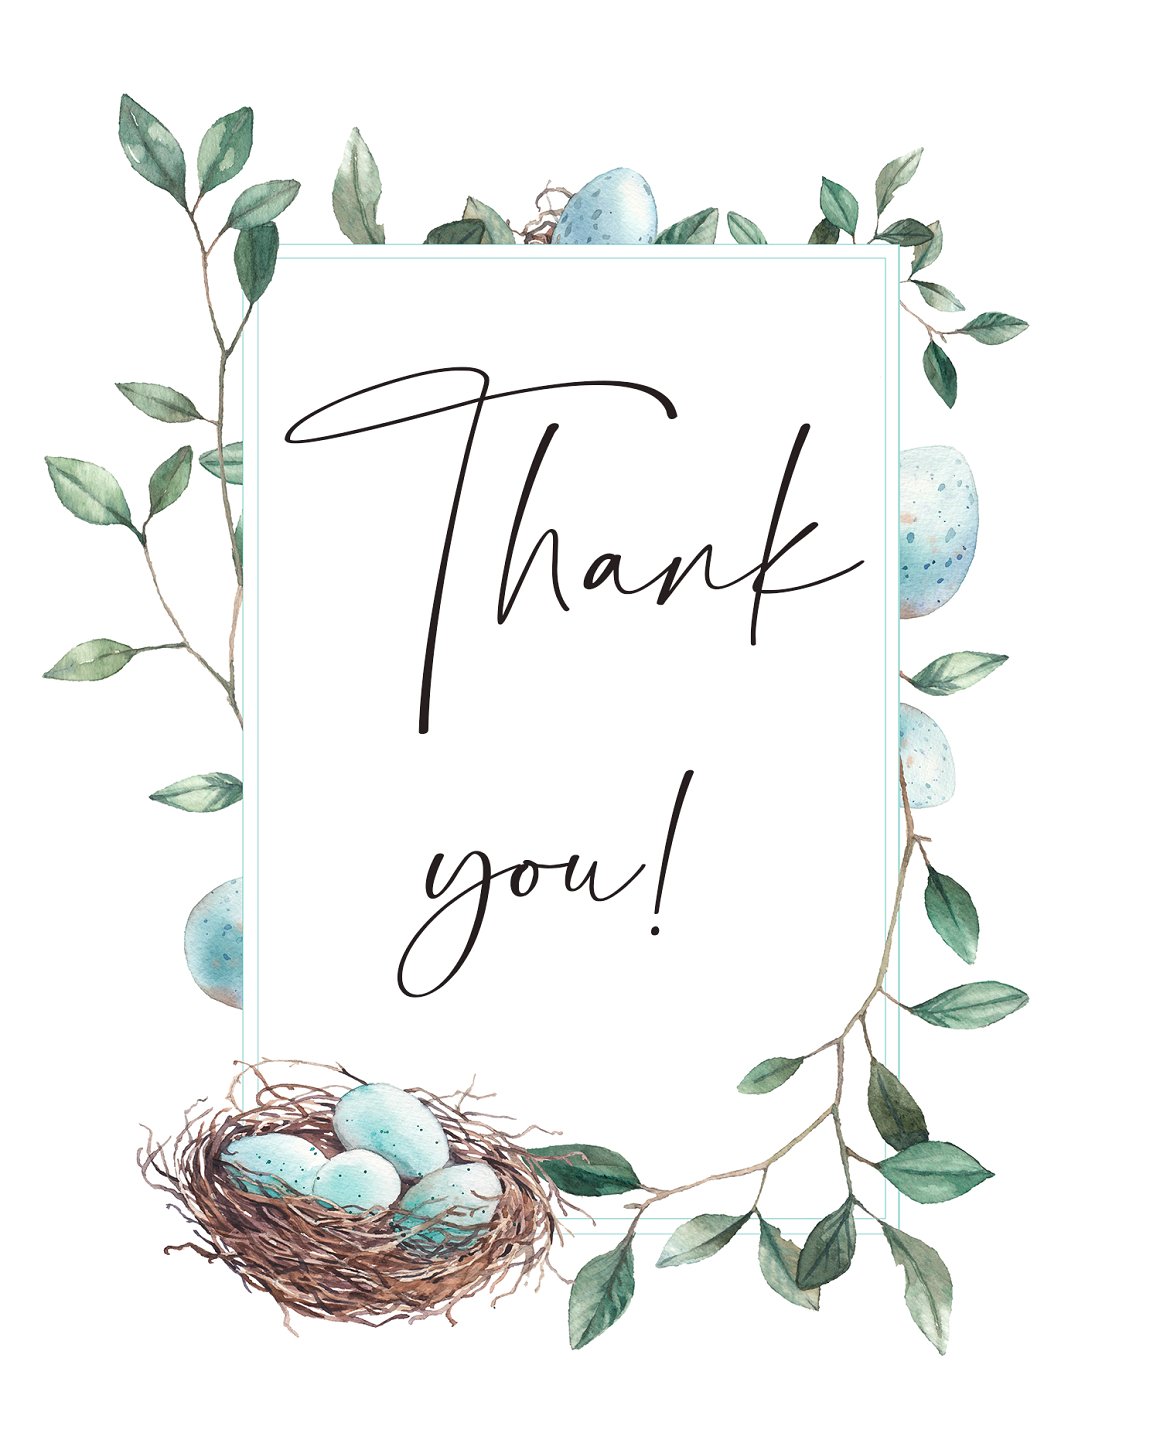 White card with black lettering "Thank you! and light blue easter eggs with twigs on a white background.